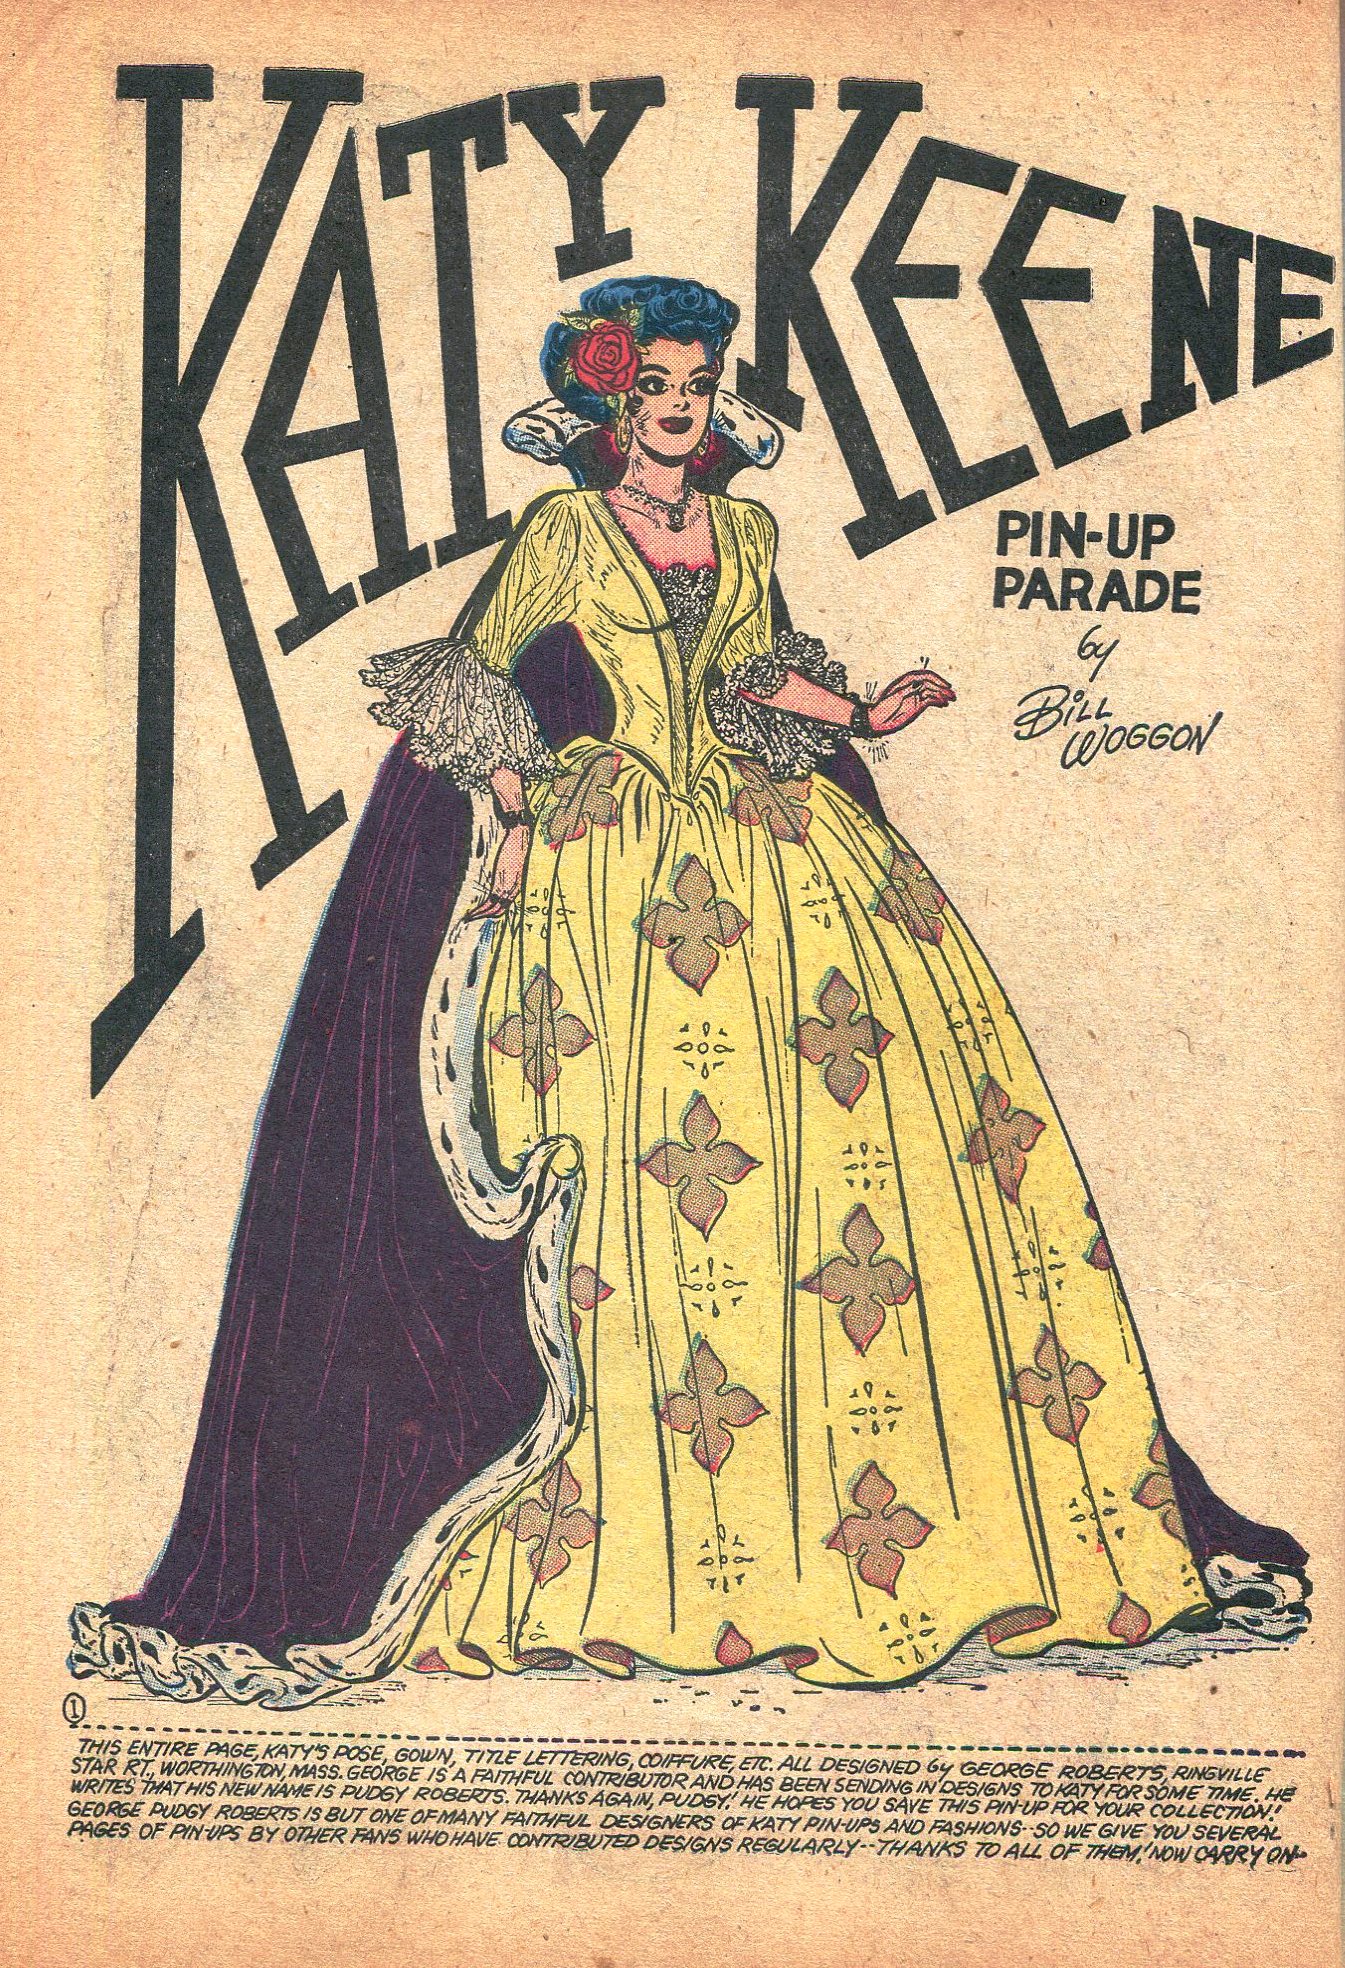 Read online Katy Keene Pin-up Parade comic -  Issue #1 - 10